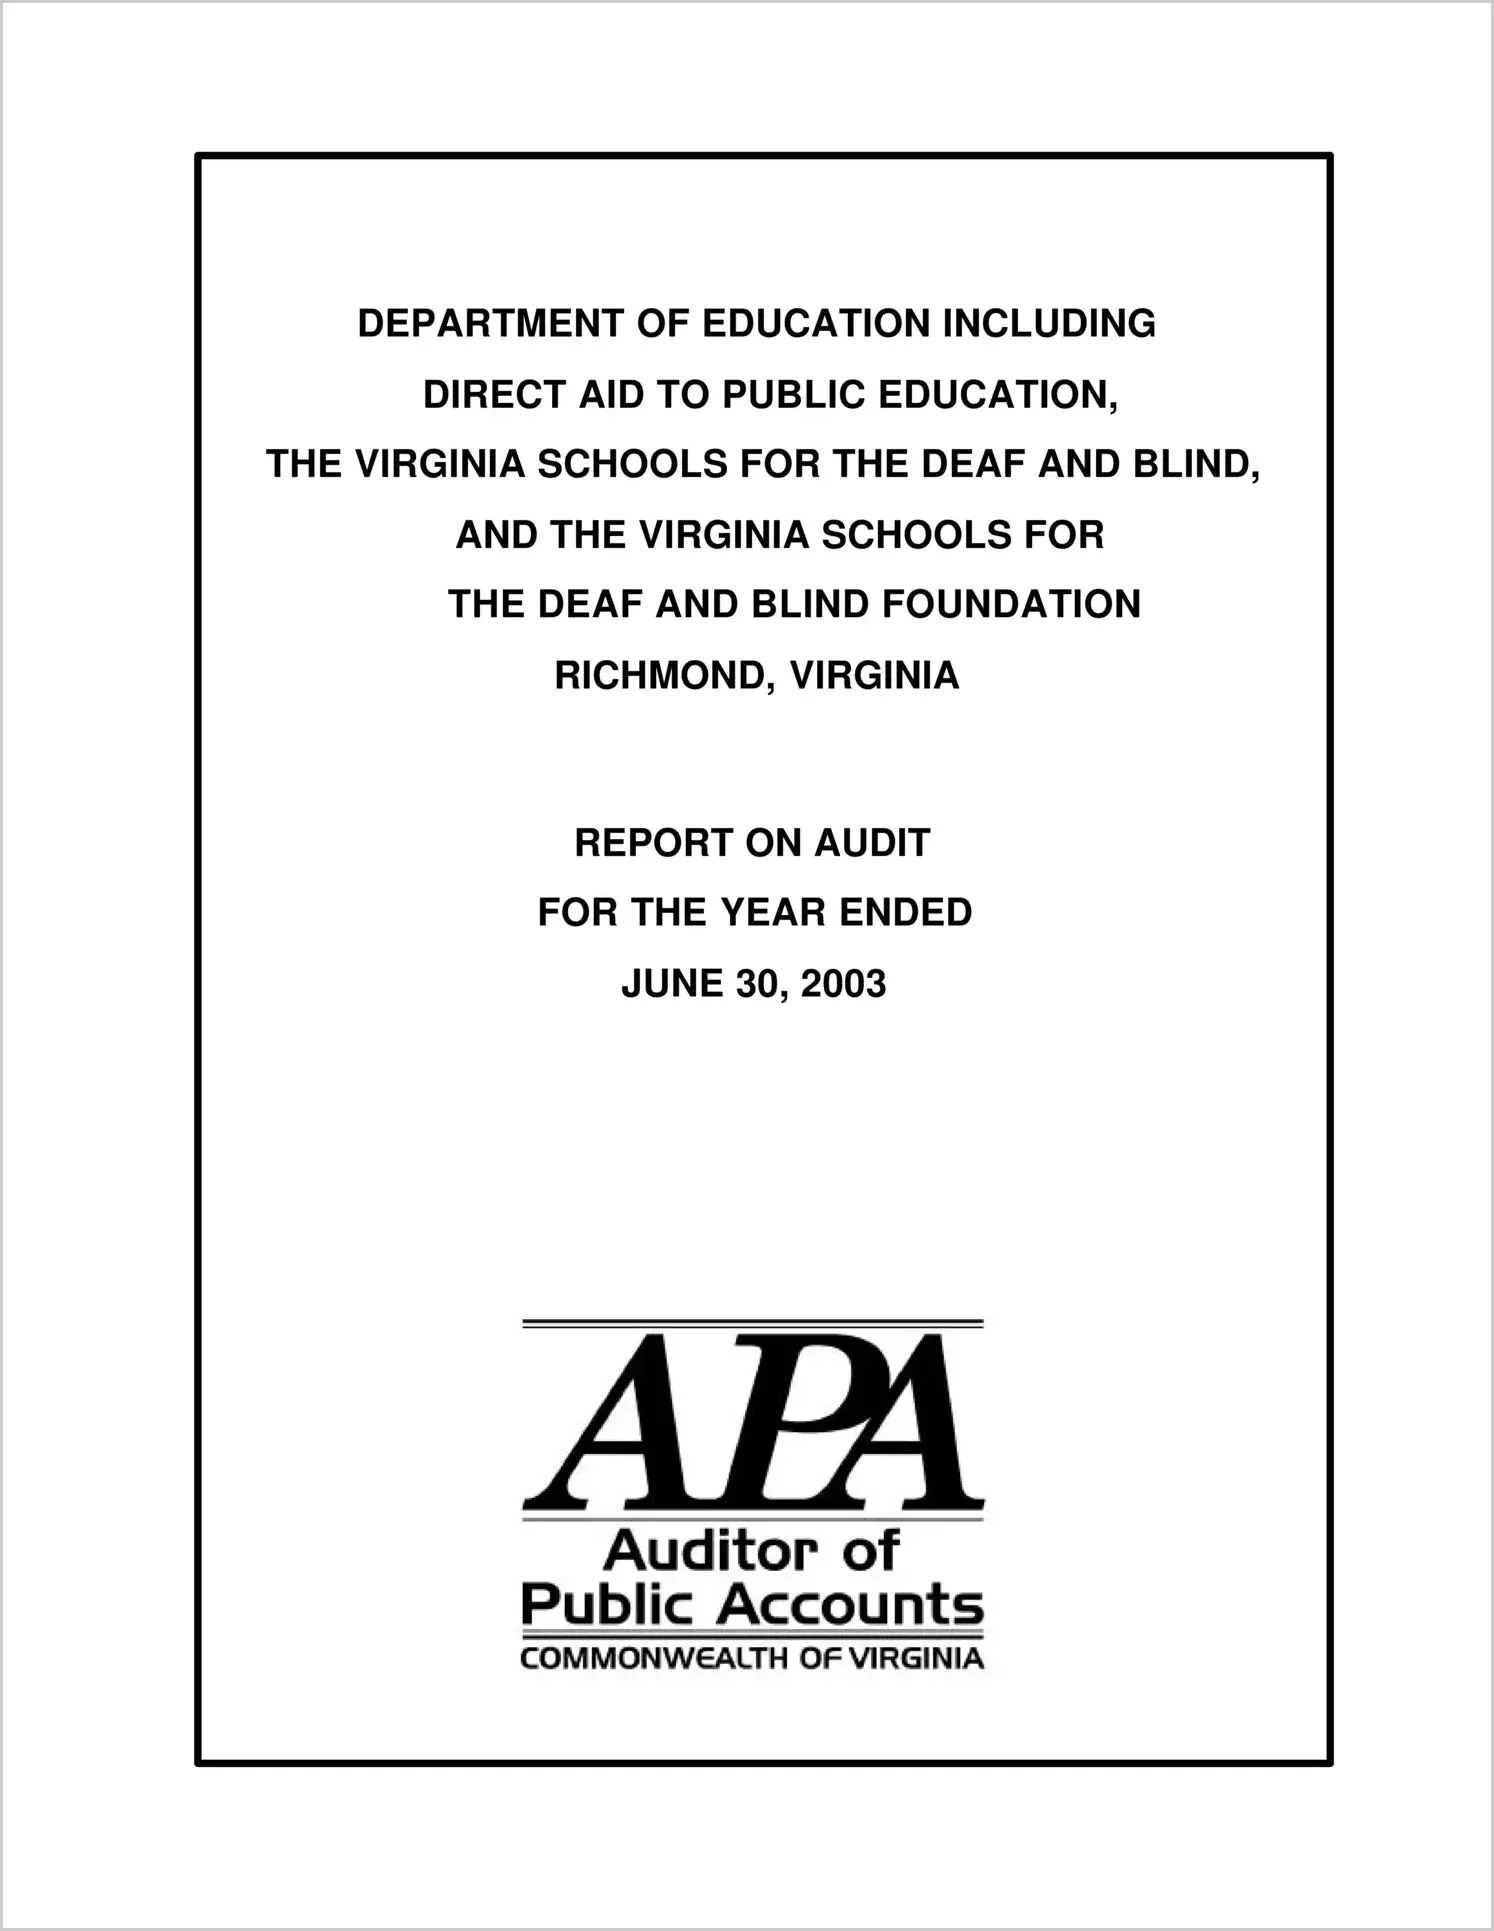 Department of Education Including Direct Aid to Public Education, the Virginia Schools for the Deaf and Blind, and the Virginia Schools for the Deaf and Blind Foundation for the year ended June 30, 2003